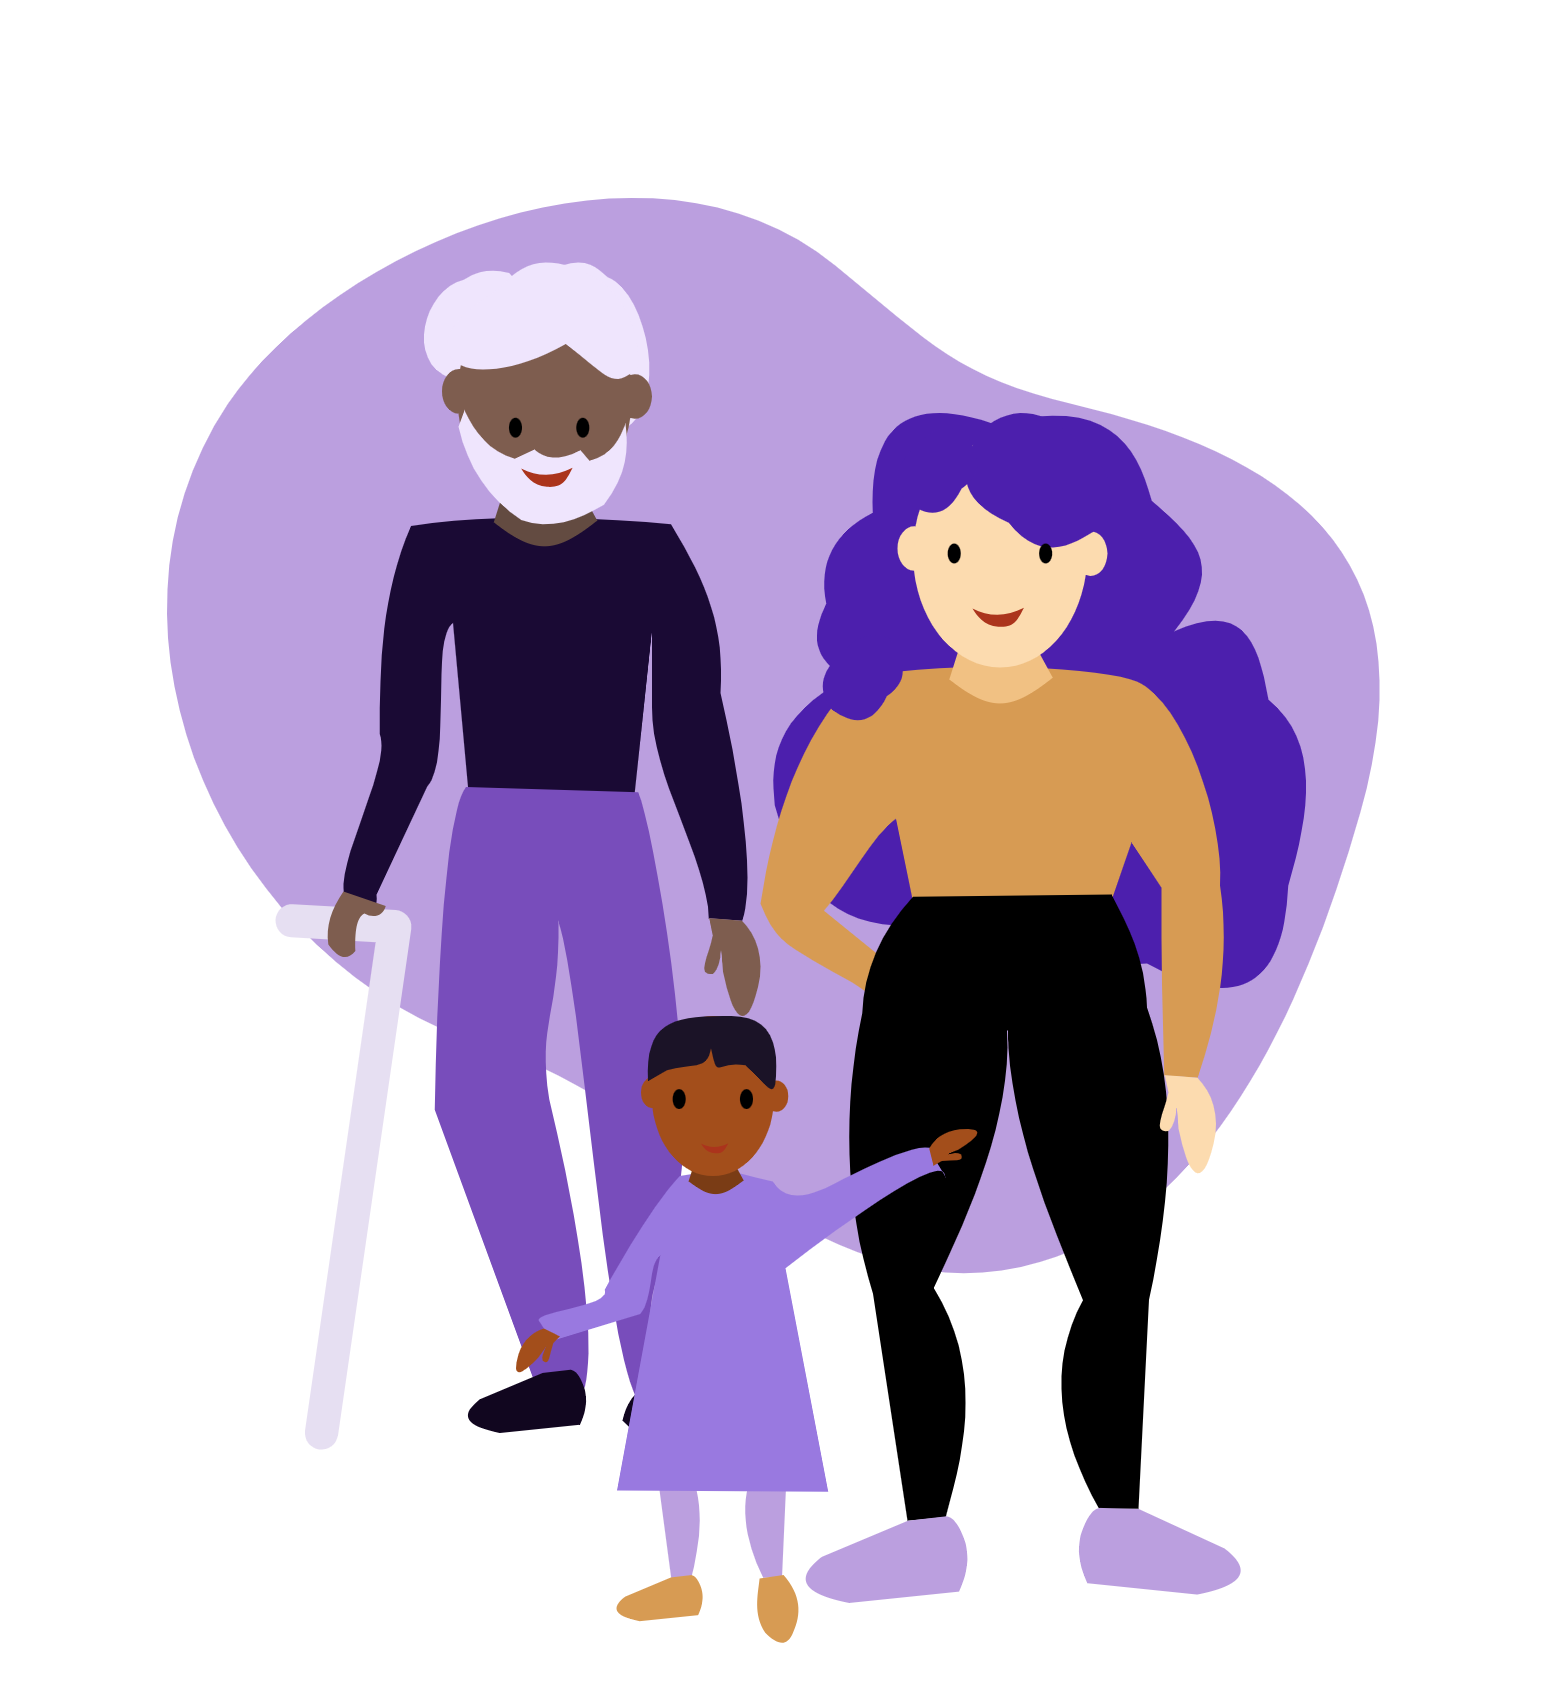 Illustration of two adults and one child standing together